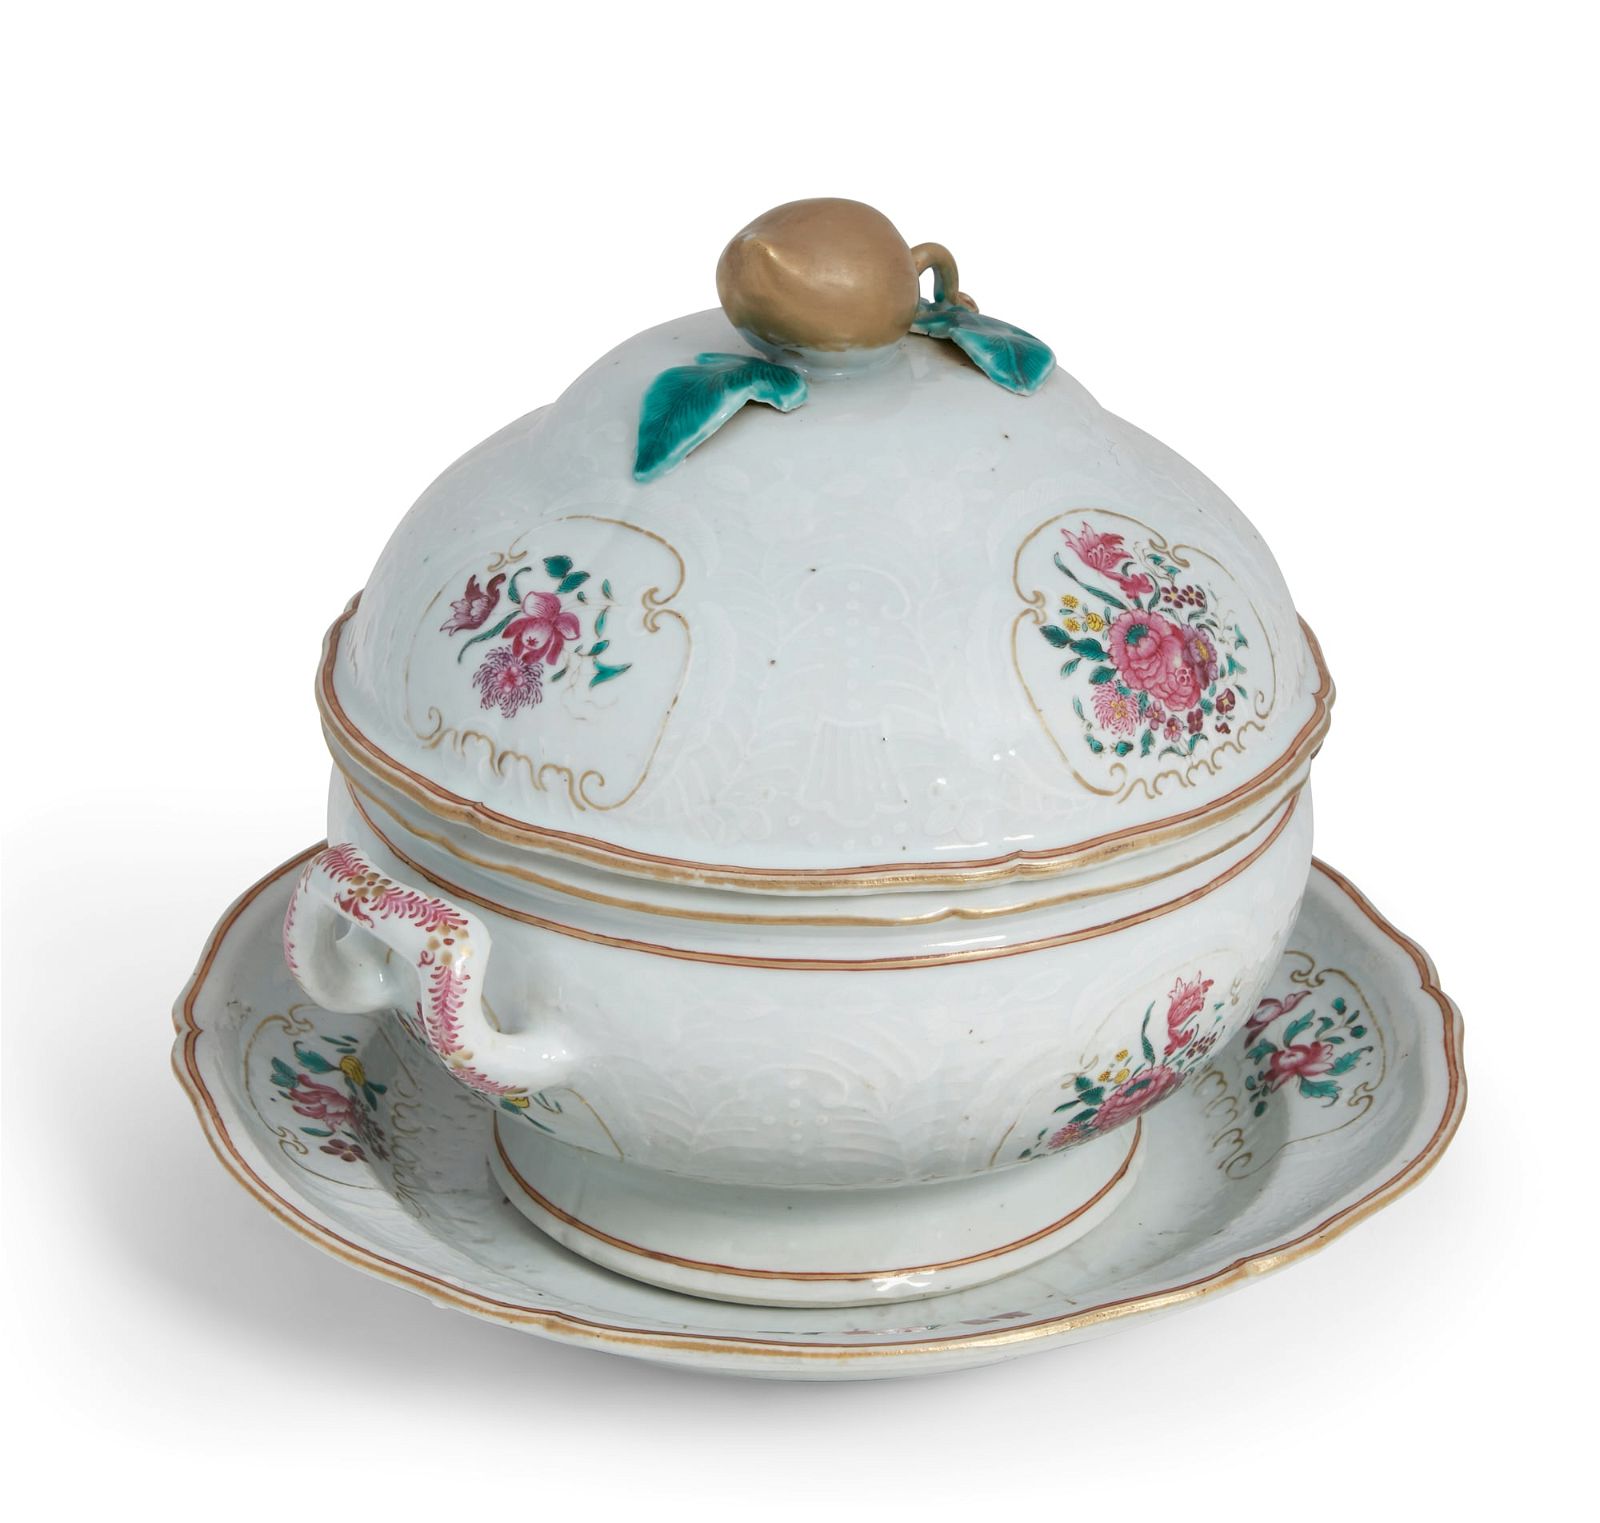 A CHINESE EXPORT PORCELAIN TUREEN